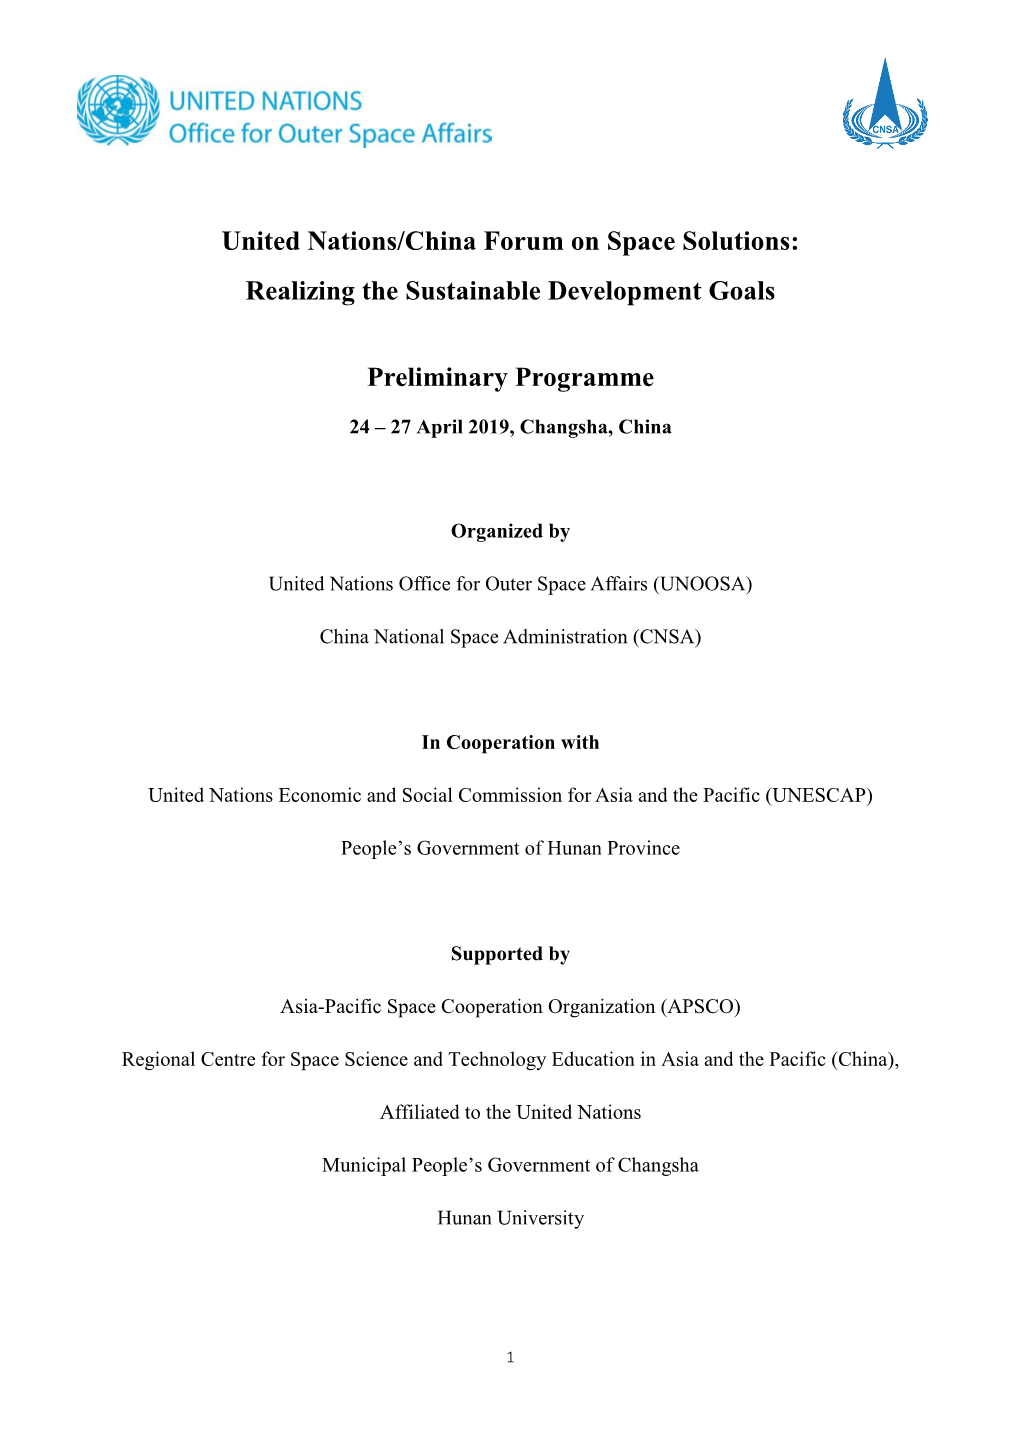 United Nations/China Forum on Space Solutions: Realizing the Sustainable Development Goals